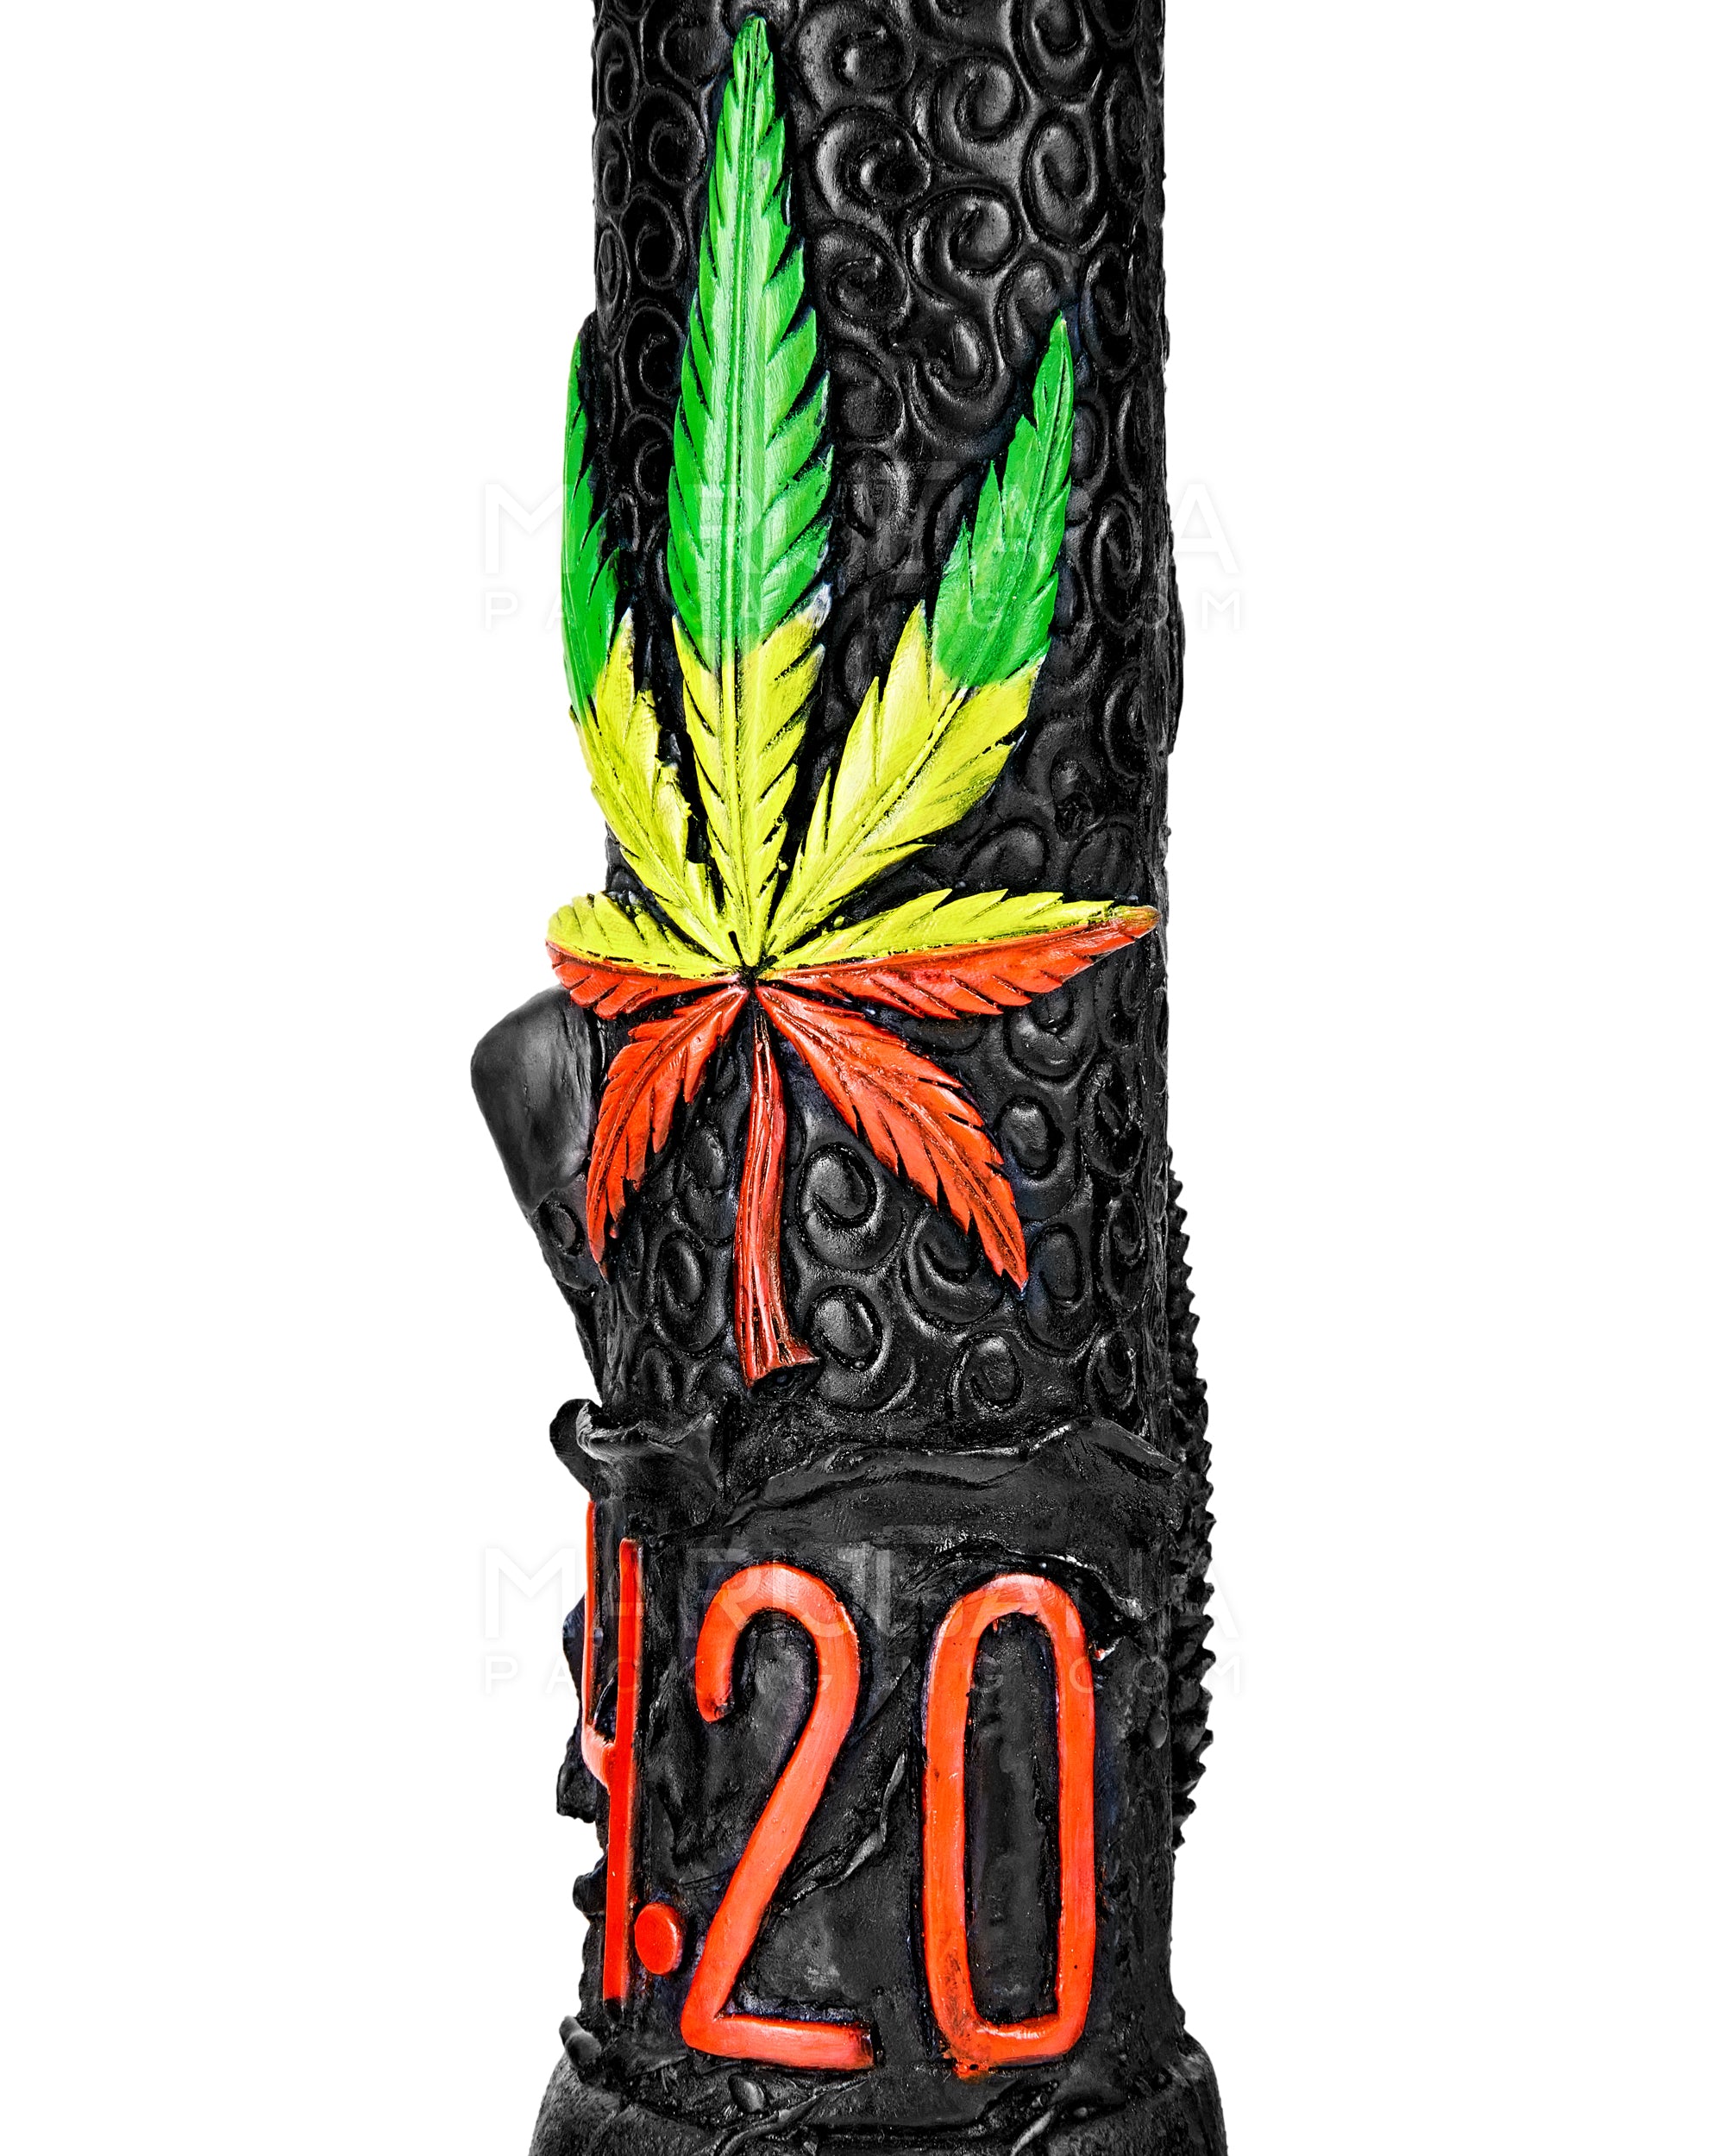 Straight Neck 420 Rasta Leaf Painted Wood Water Pipe w/ Iridescent Marble | 12in Tall - Wood Bowl - Rasta - 4